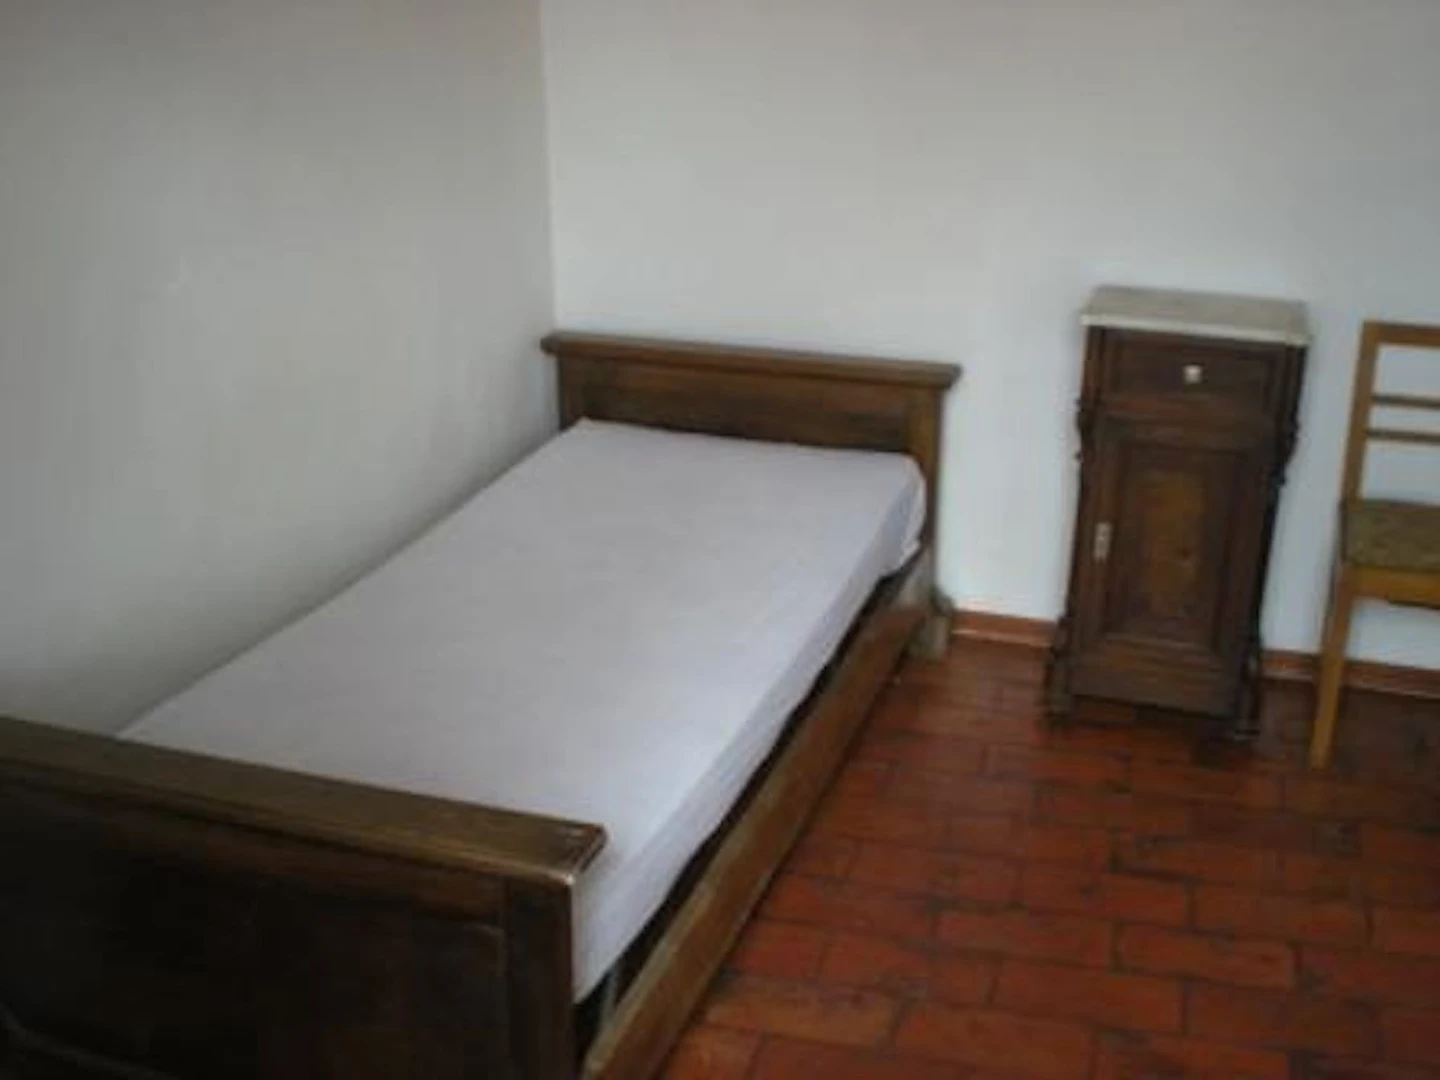 Room for rent with double bed Pisa